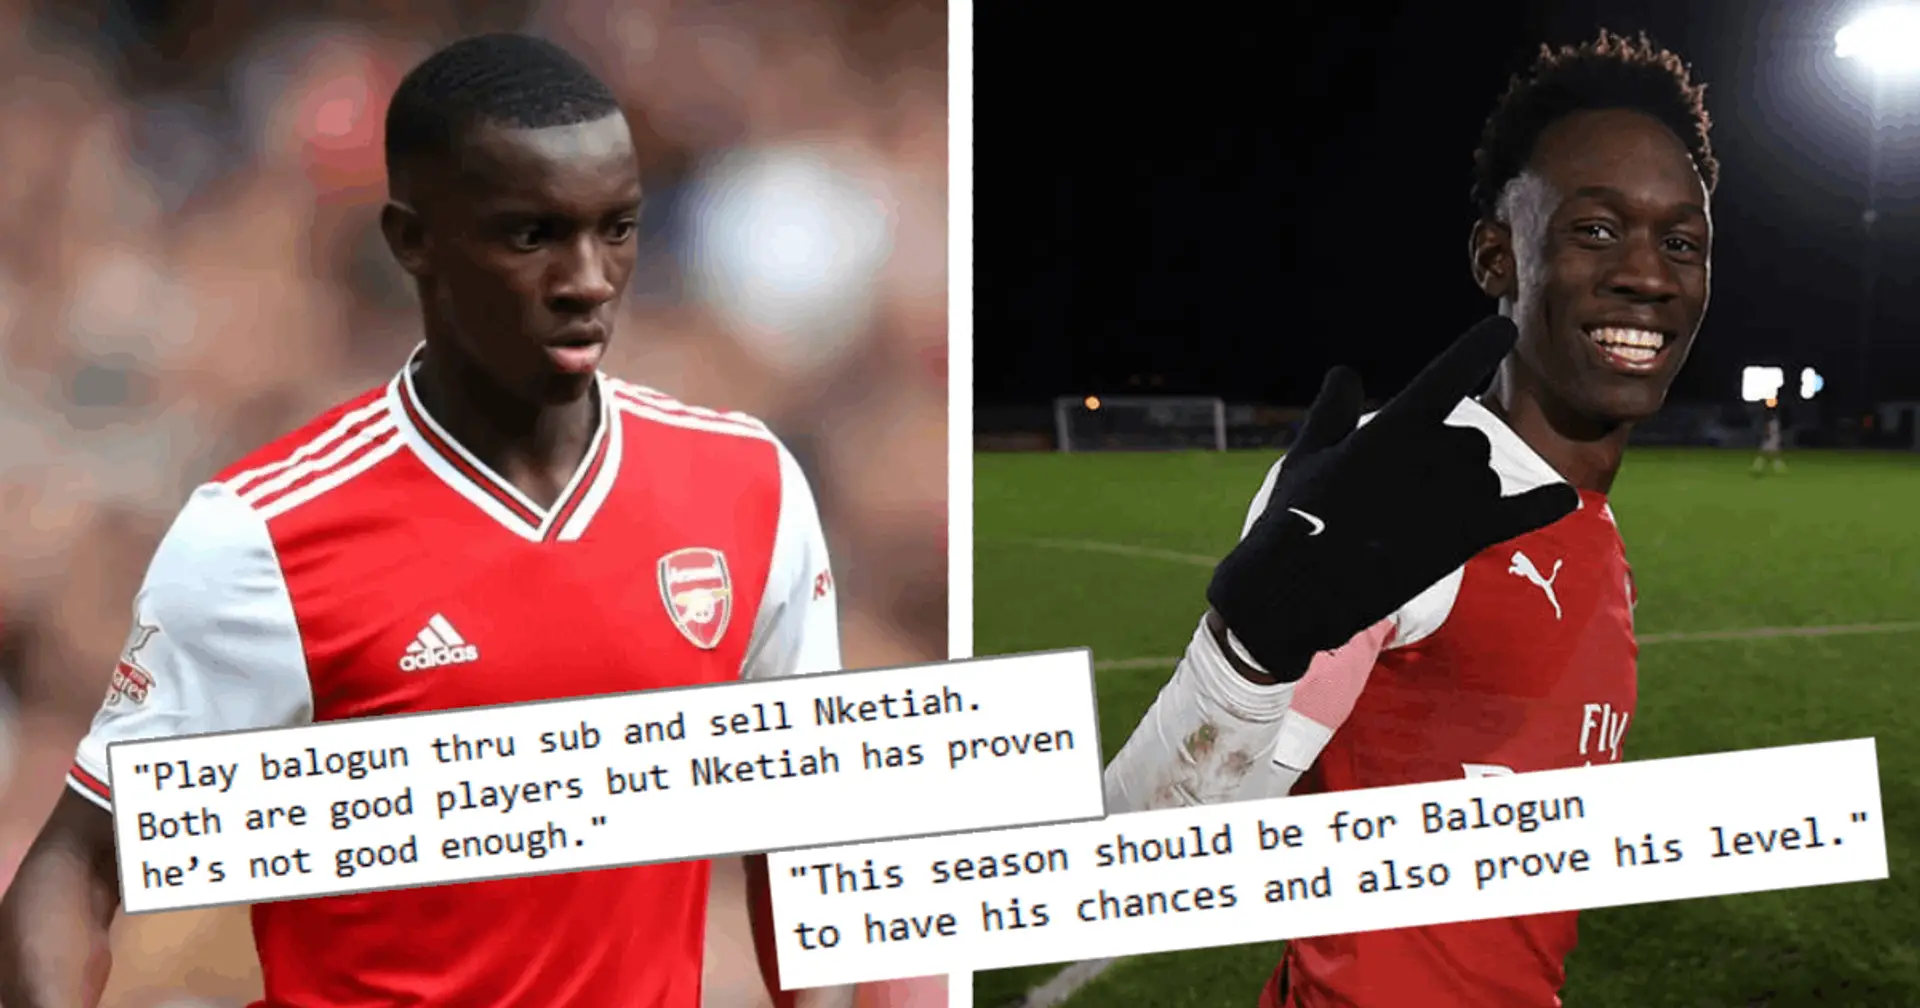 'Eddie has had his chances, it's Balogun time': Tribuna fans discuss what should be Arsenal's decision on young strikers in summer